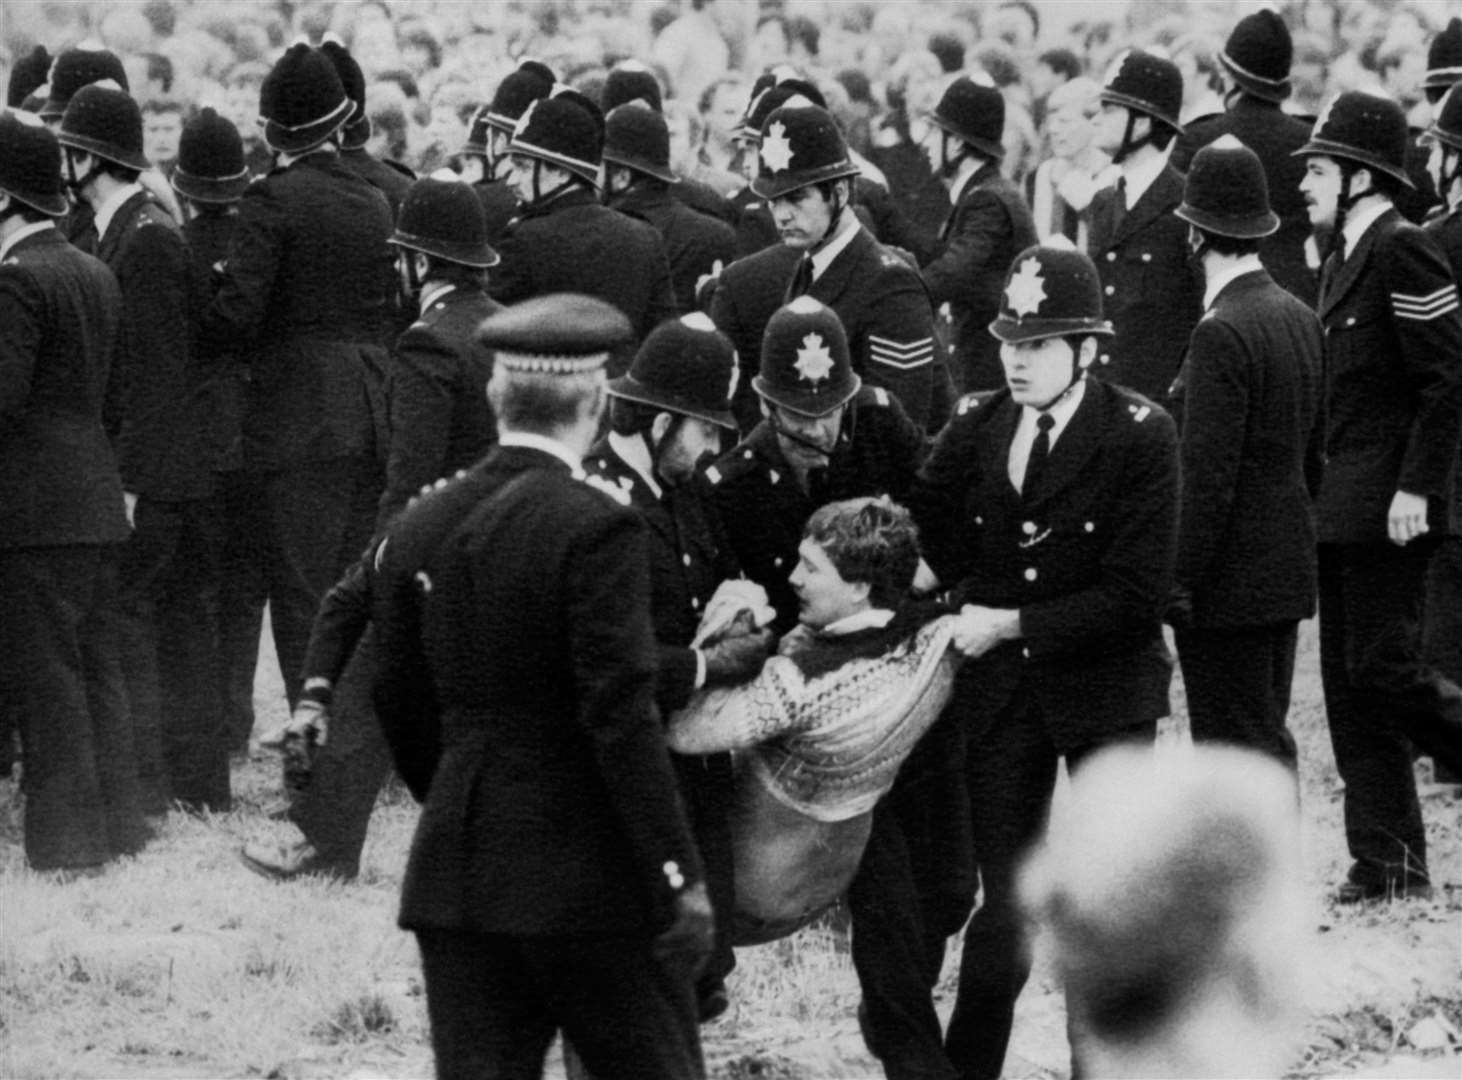 The miners’ strike led to violence and division in mining communities (PA Archive)